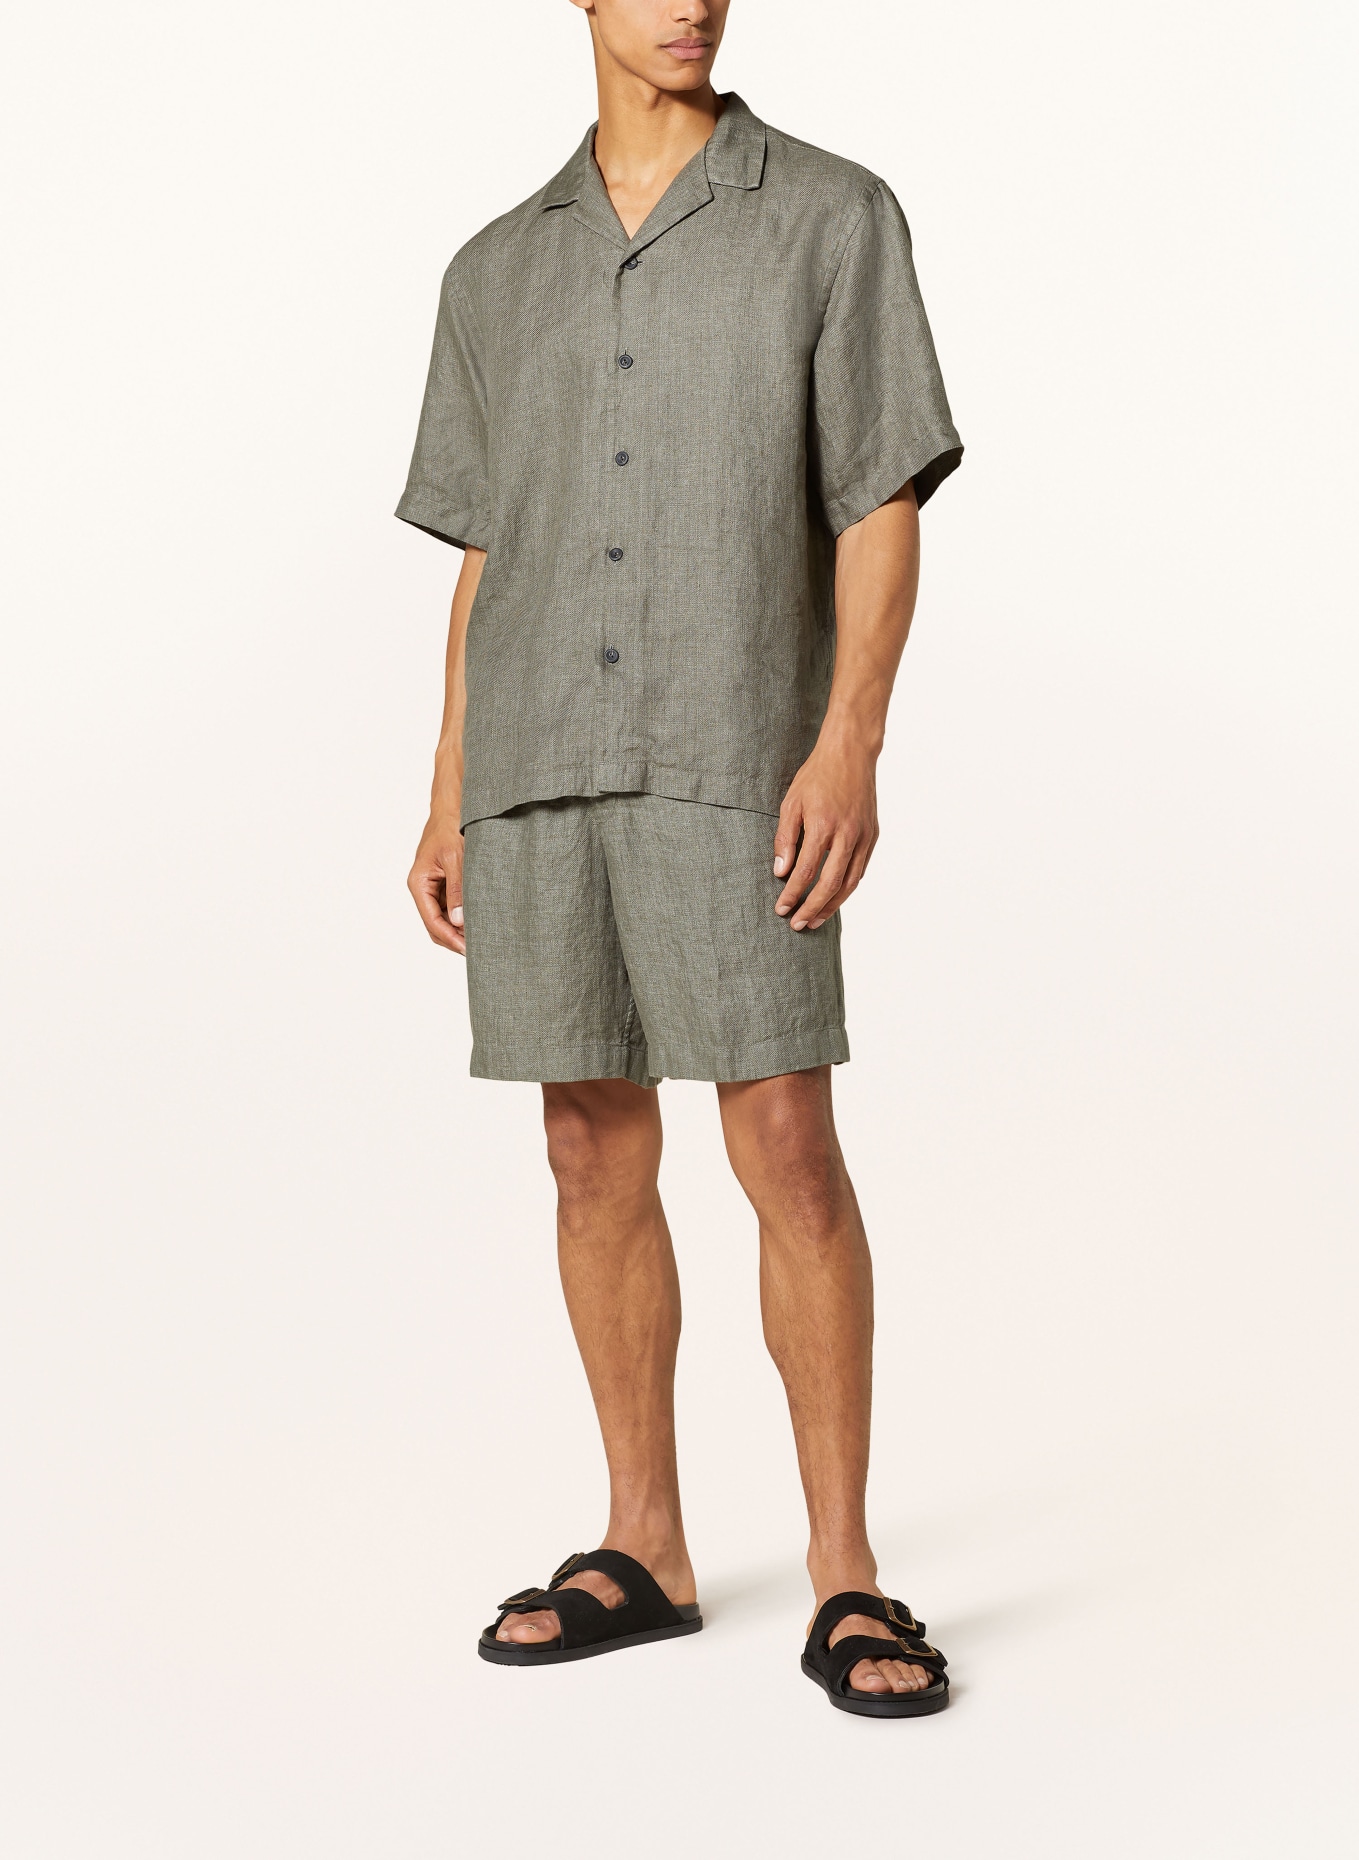 ETON Resort shirt relaxed fit made of linen, Color: GRAY (Image 2)